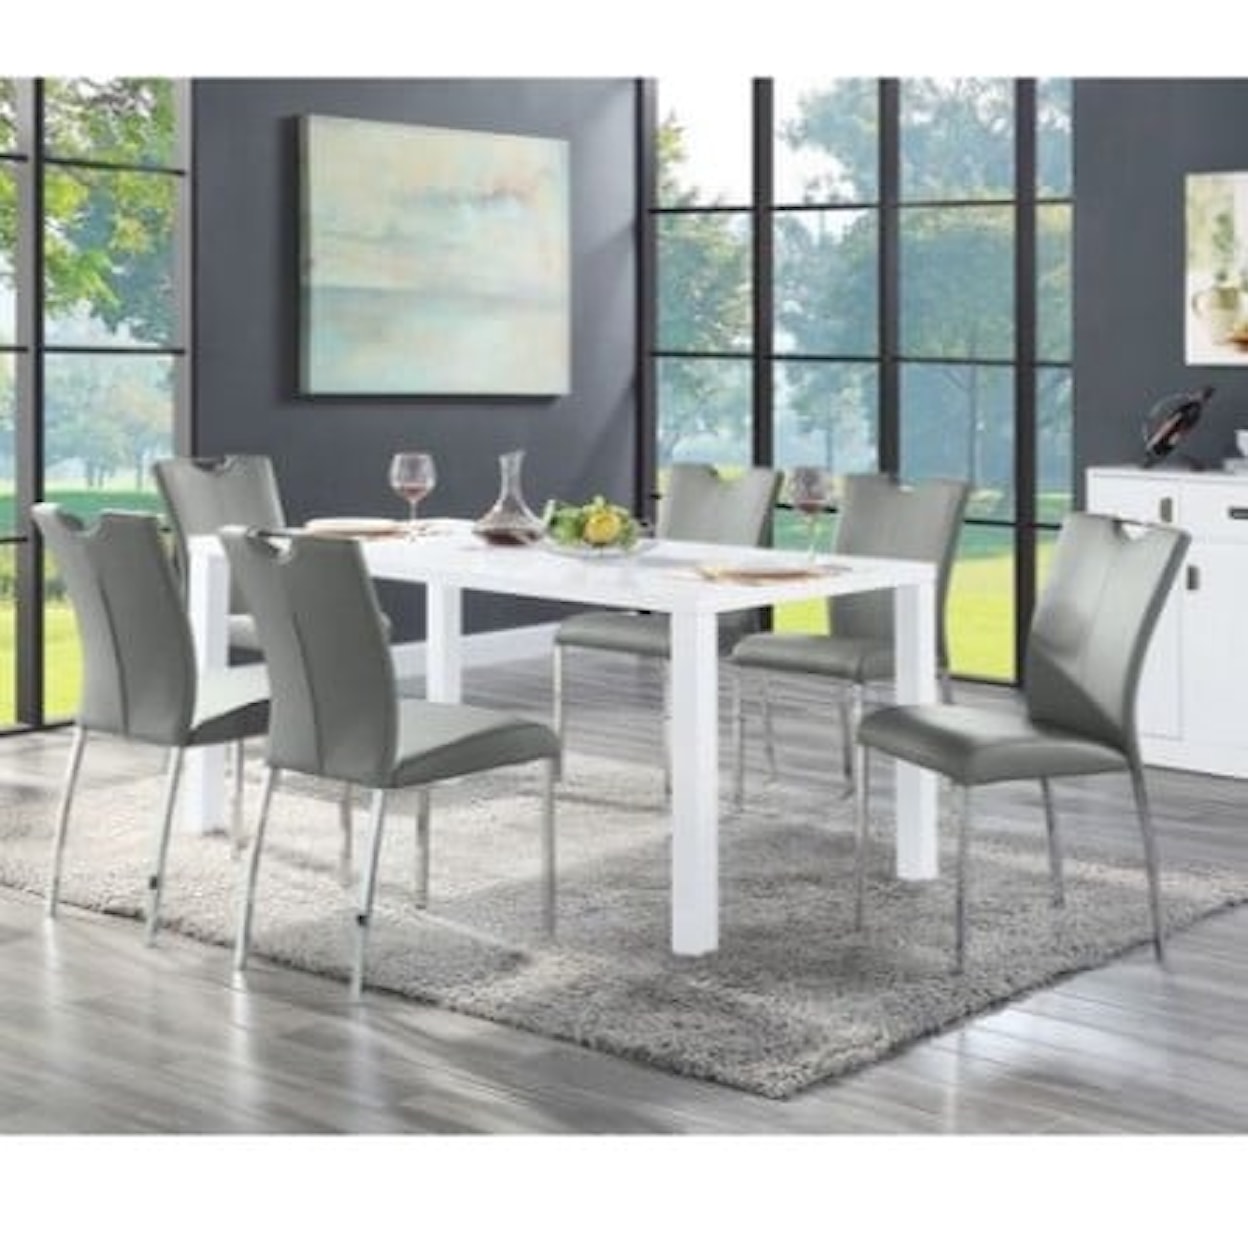 Acme Furniture Pagan Dining Table